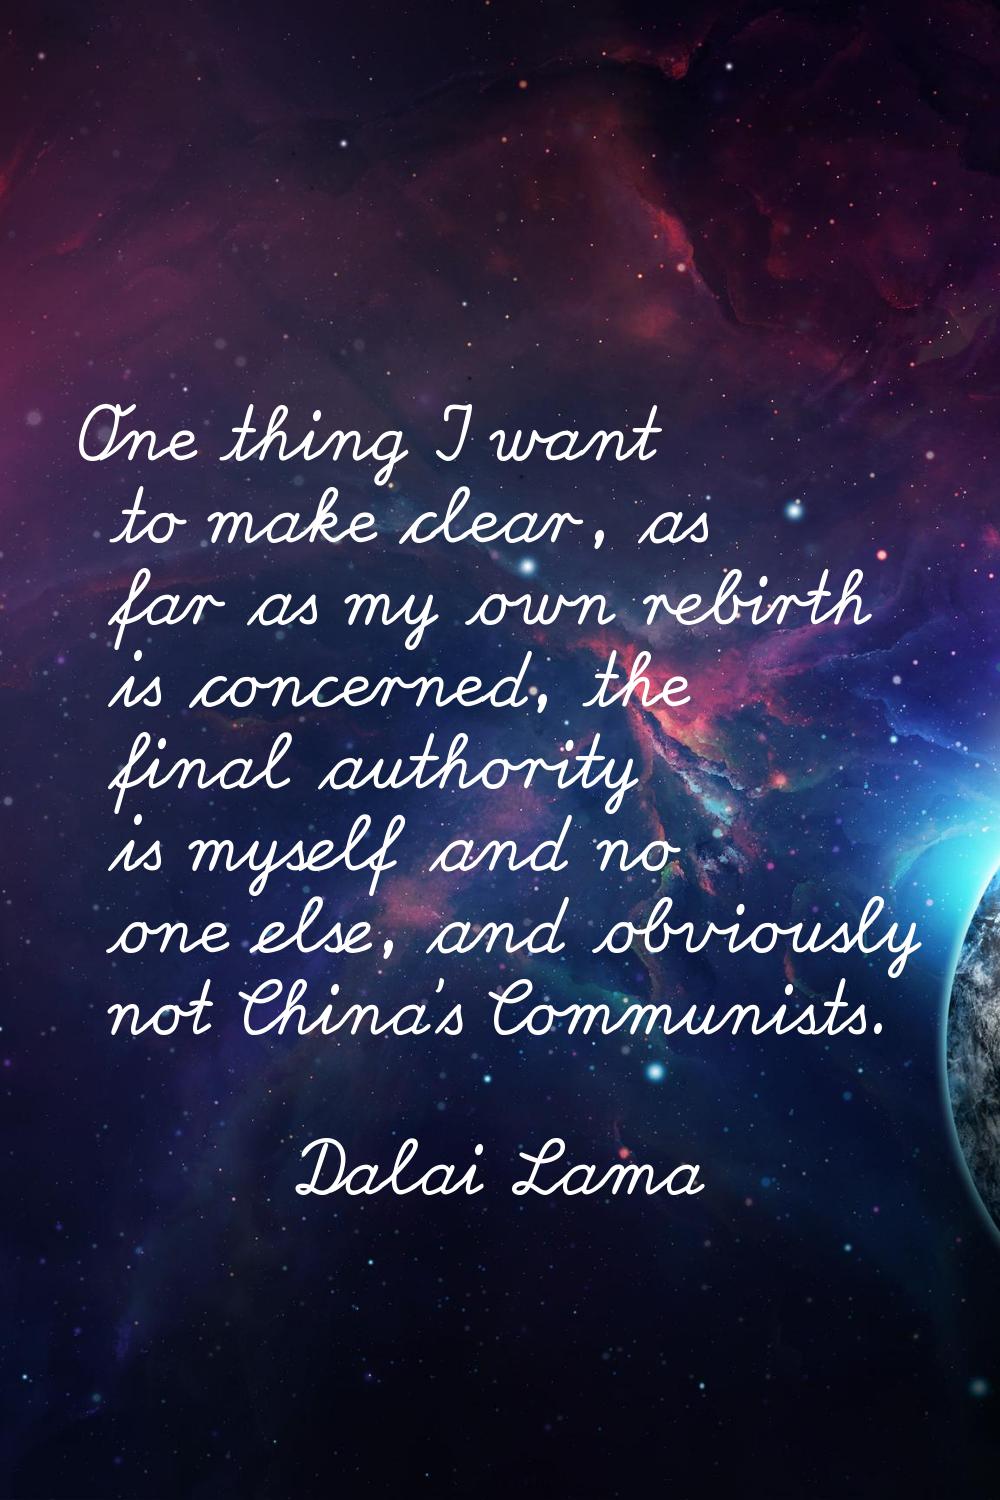 One thing I want to make clear, as far as my own rebirth is concerned, the final authority is mysel